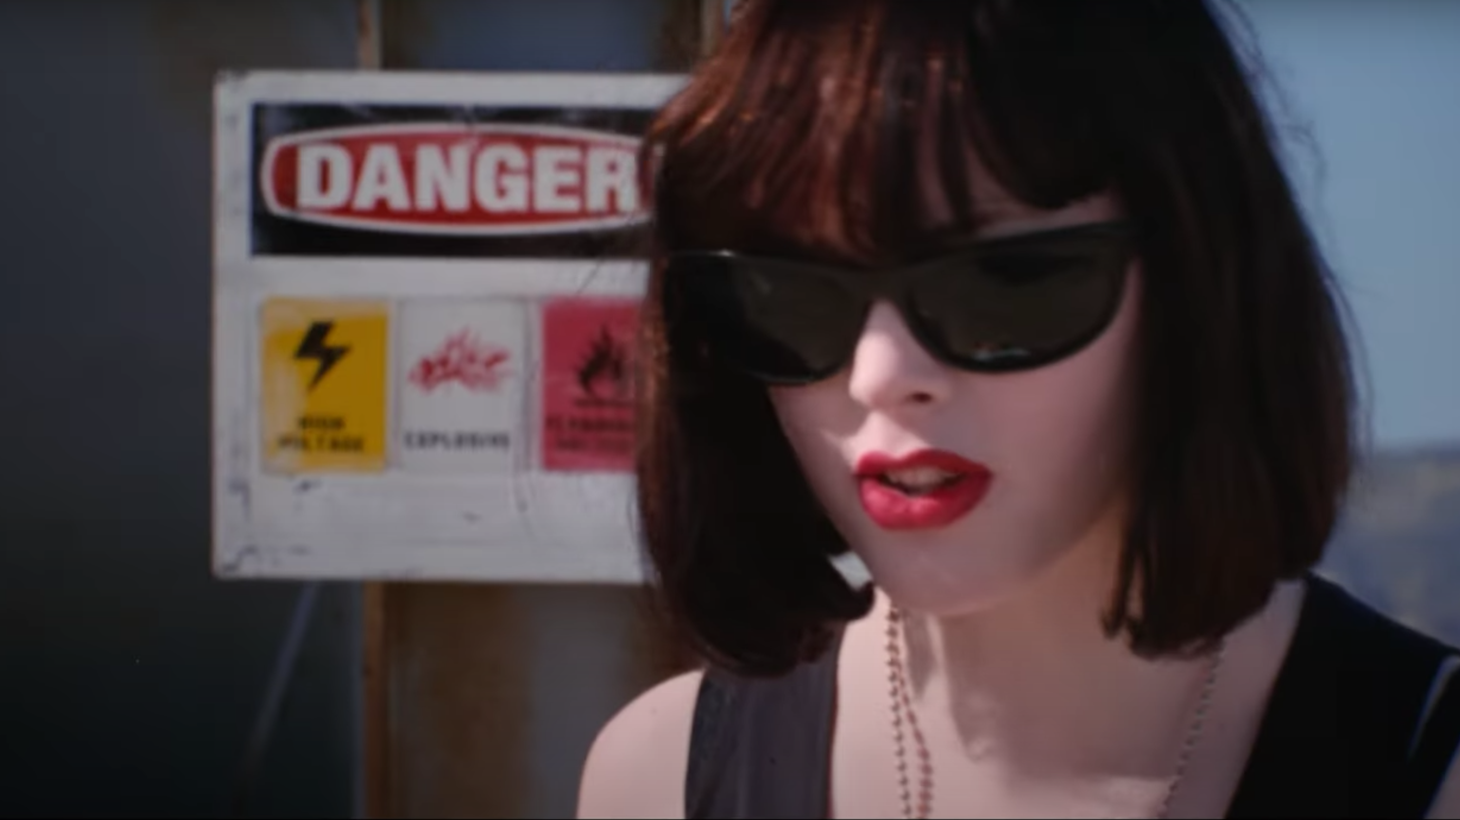 In “The Doom Generation,” Jordan White and Amy Blue are a young couple going home after a night at a Los Angeles club. They pick up a drifter who ends up killing a convenience store worker, and all three go on the run.